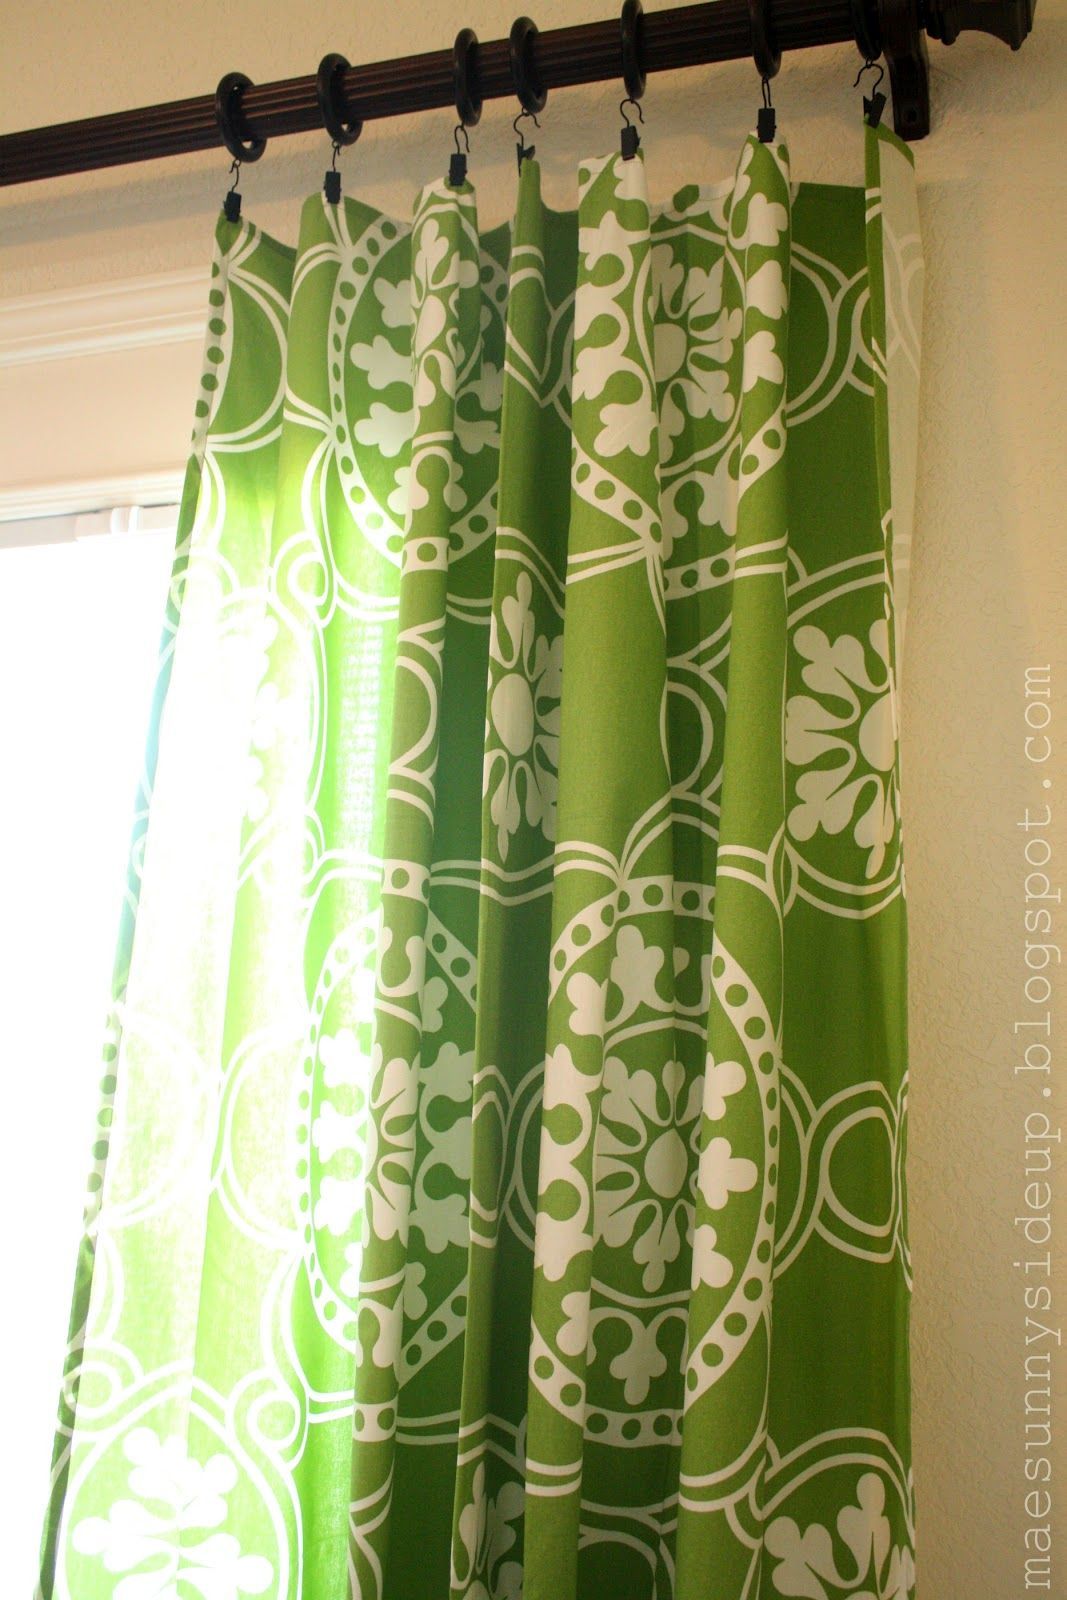 60 X 84 tablecloths as curtain panels for sliding glass doors. So much cheaper t